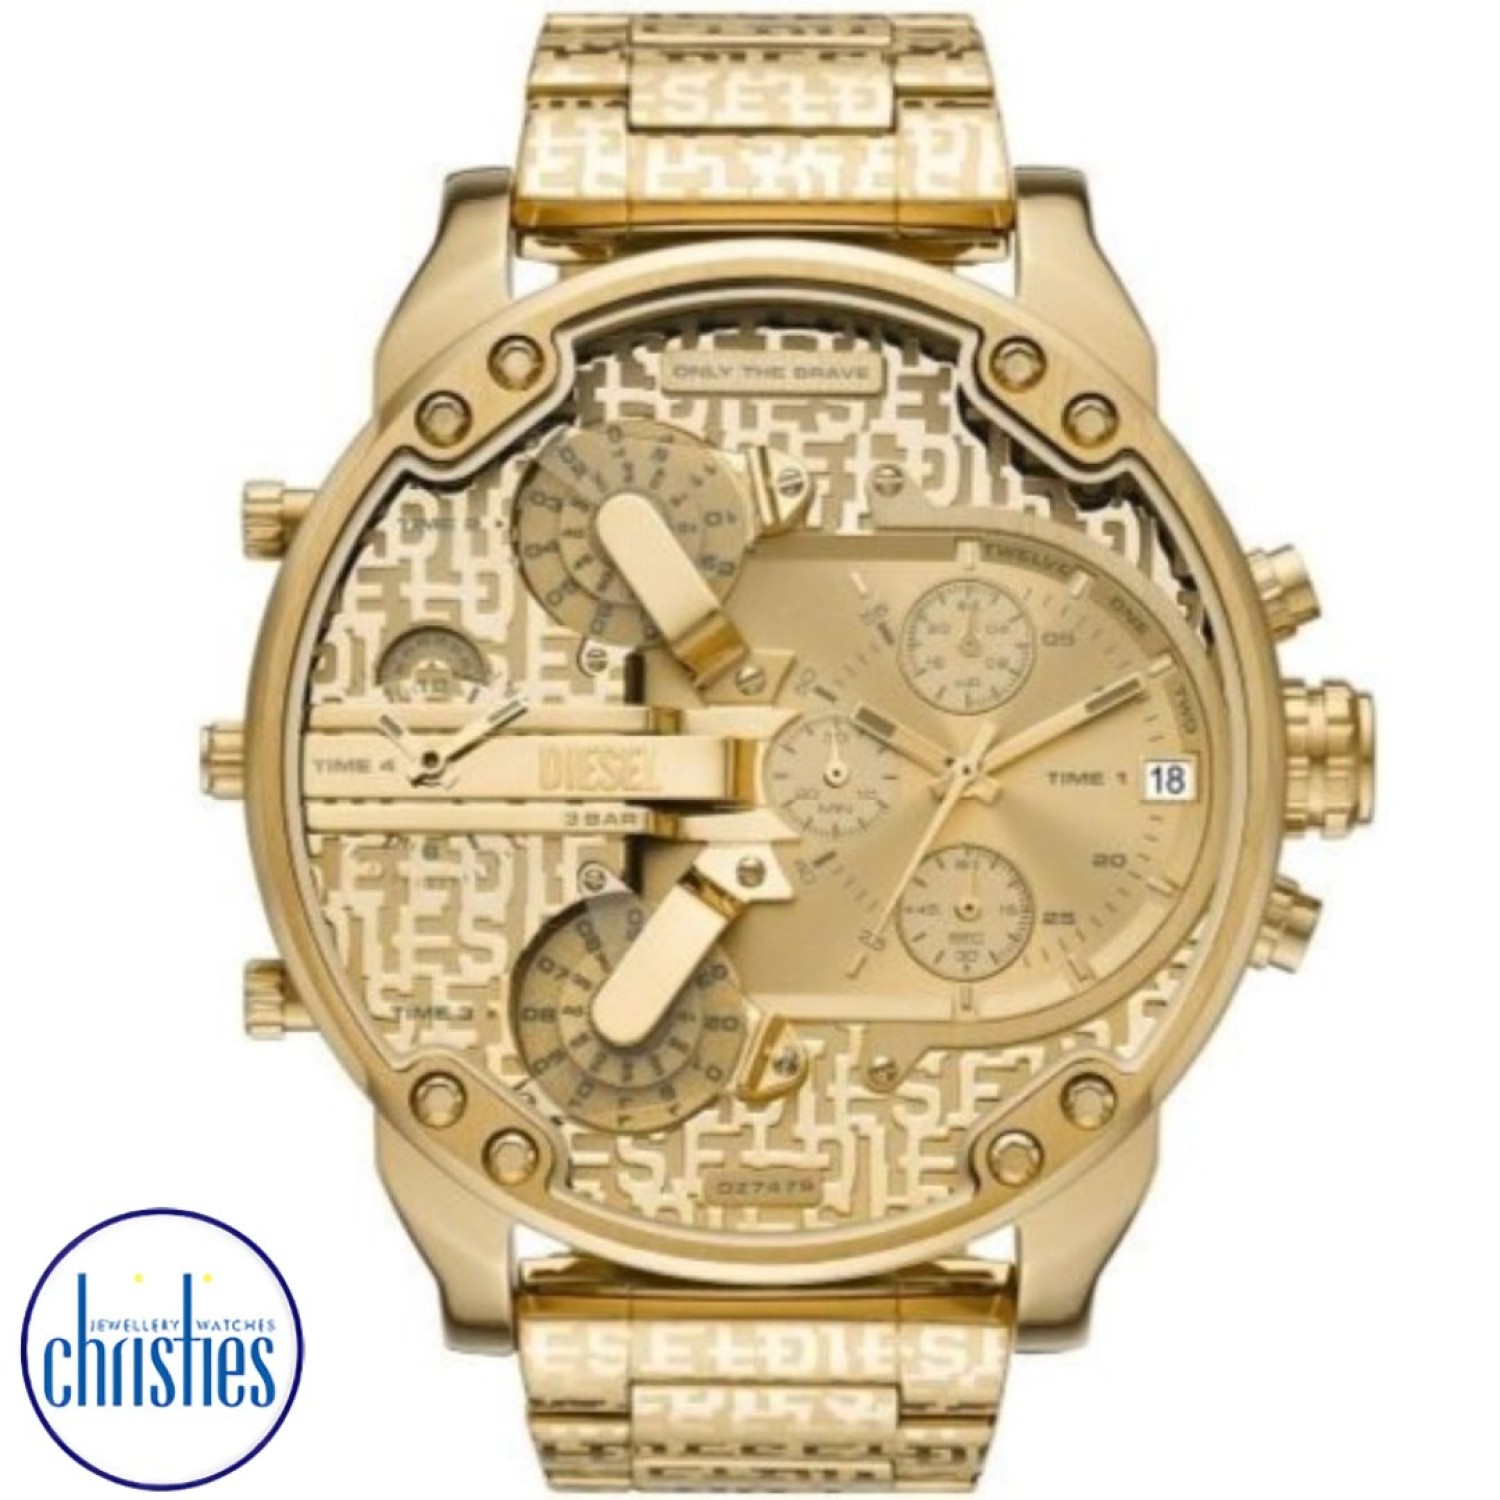 DZ7479 Diesel Mr. Daddy 2.0 Chronograph Gold-ToneWatch  DZ7479 Diesel Watches Auckland- Christies Jewellery Online and Auckland - Free Delivery - Afterpay, Laybuy and Zip  the easy way to pay